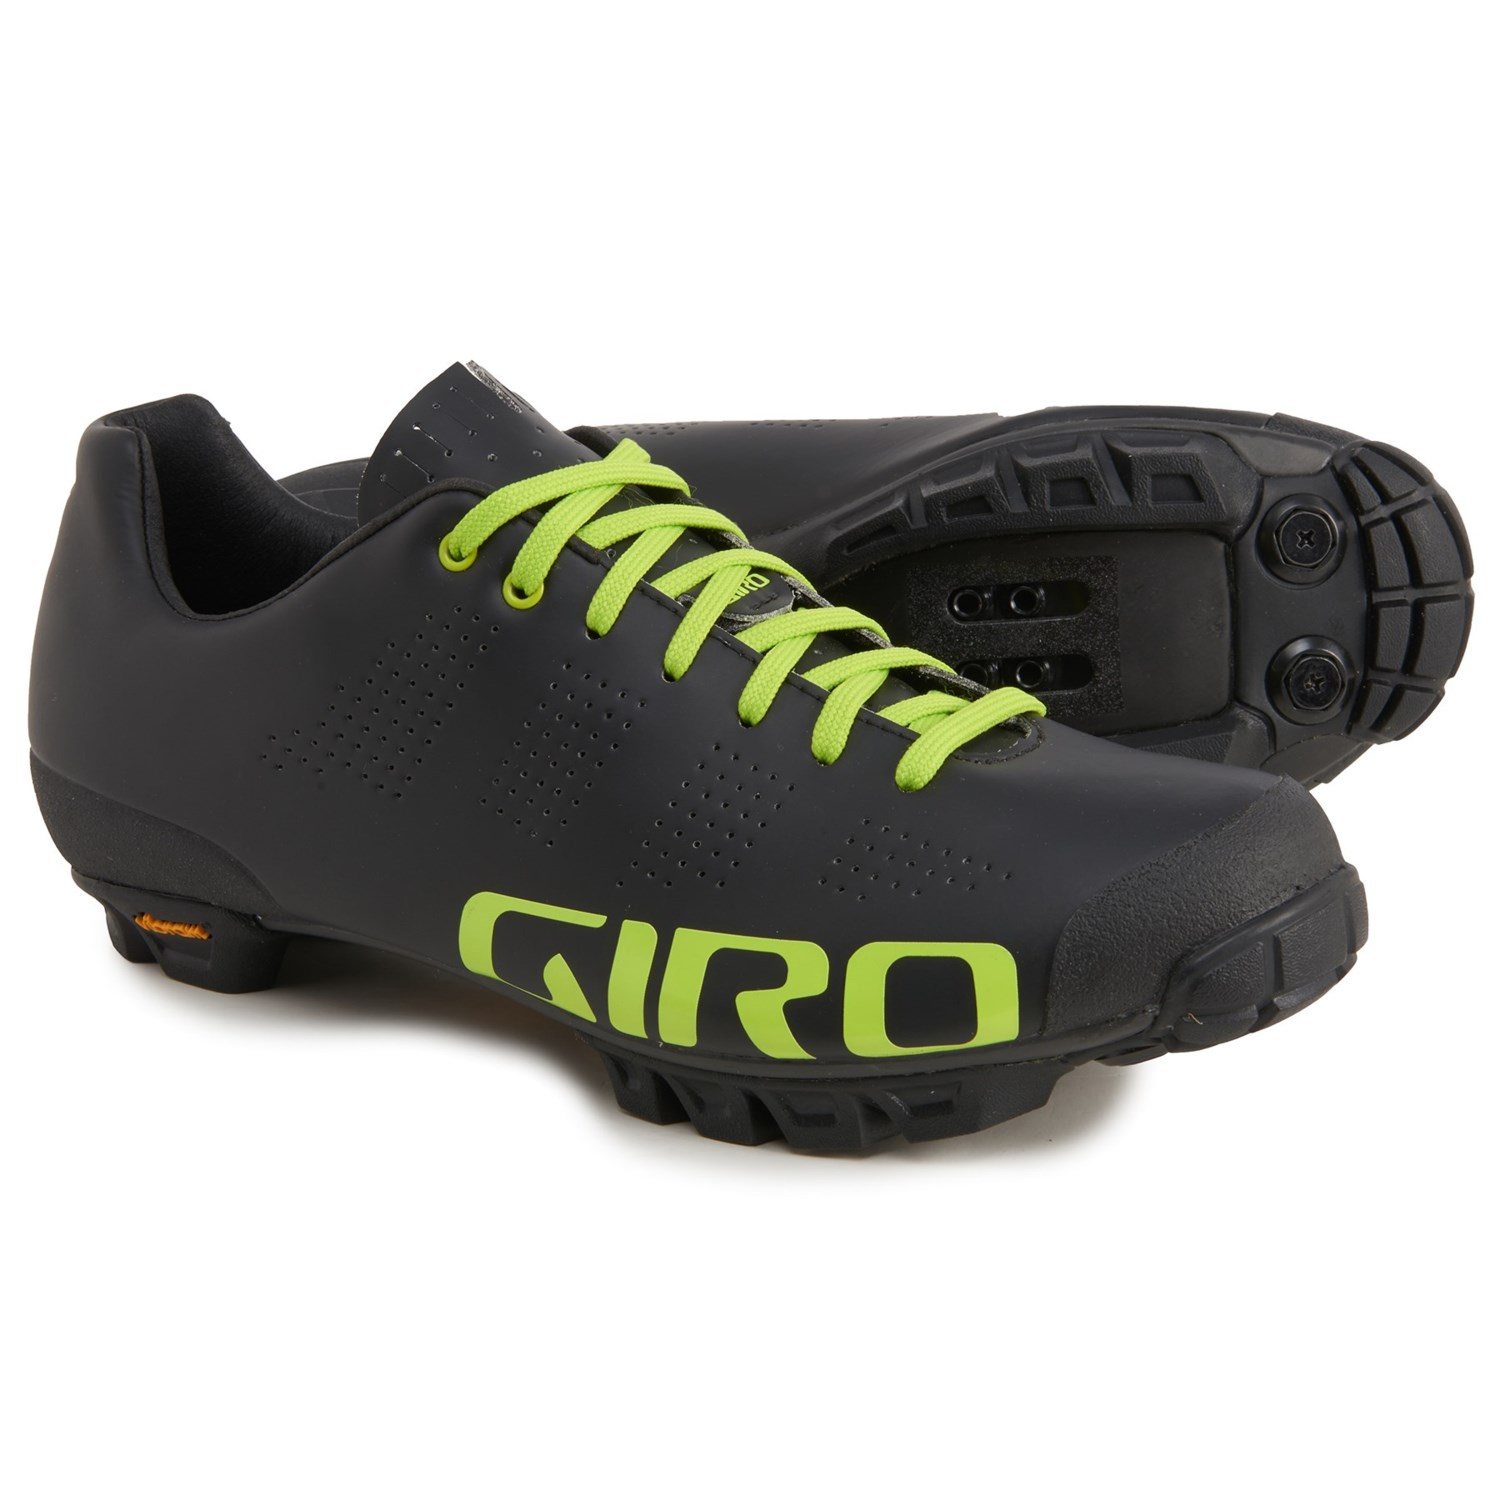 Details about   New RIGHT SINGLE SHOE Giro Empire VR90 MTB Cycling Bike 42.5 9.25 Silver Carbon